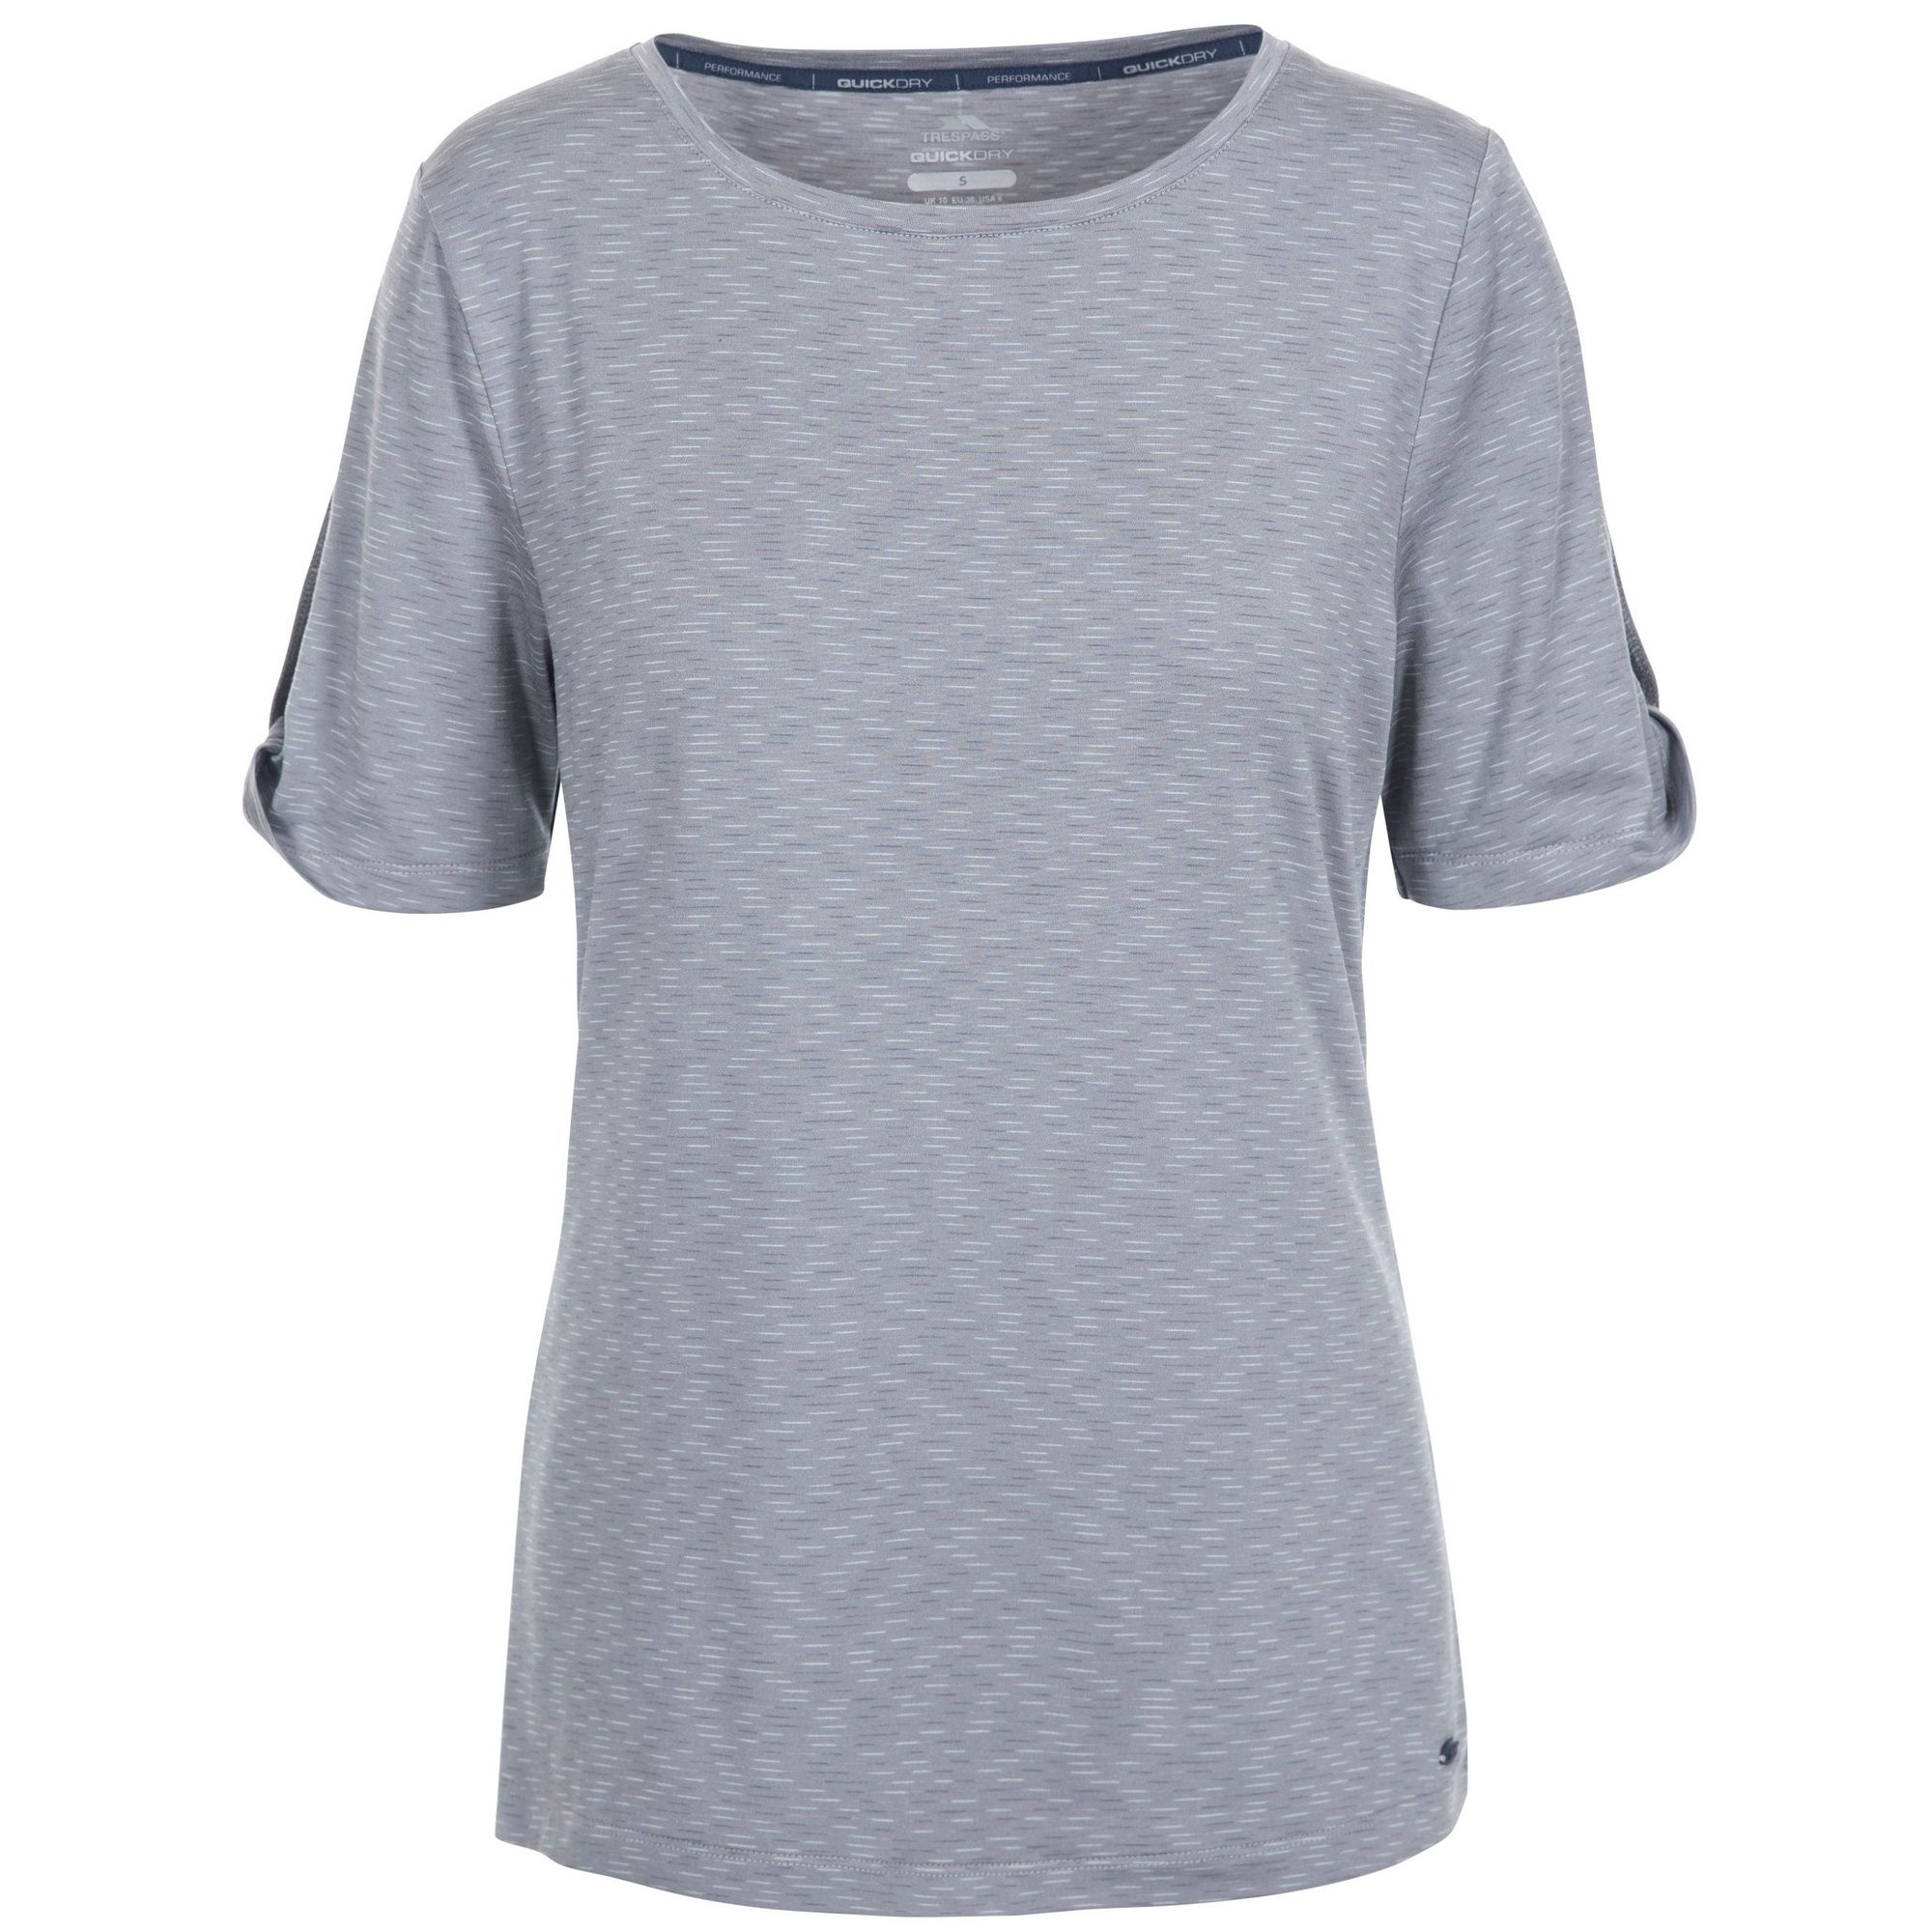 92% Polyester, 8% Spandex. Round neck top. Short sleeve with twist detail at cuff. Space dyed stripe. Quick dry. Trespass Womens Chest Sizing (approx): XS/8 - 32in/81cm, S/10 - 34in/86cm, M/12 - 36in/91.4cm, L/14 - 38in/96.5cm, XL/16 - 40in/101.5cm, XXL/18 - 42in/106.5cm.